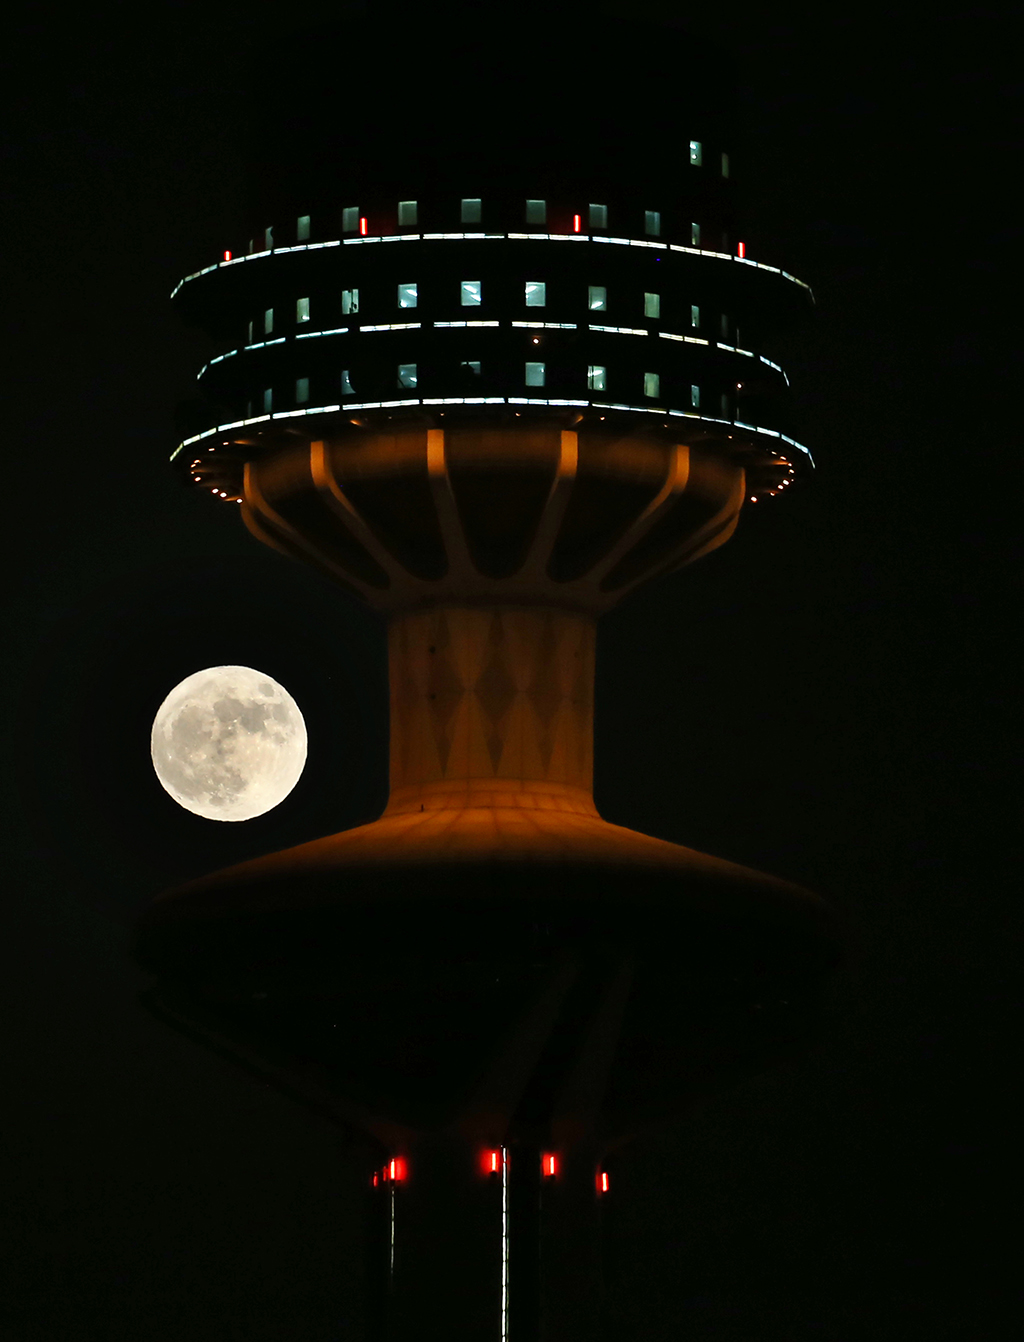 KUWAIT: The full buck supermoon rises near the Liberation Tower in Kuwait City on July 13, 2022. The July full moon is the largest supermoon of 2022. – Photo by Yasser Al-Zayyat